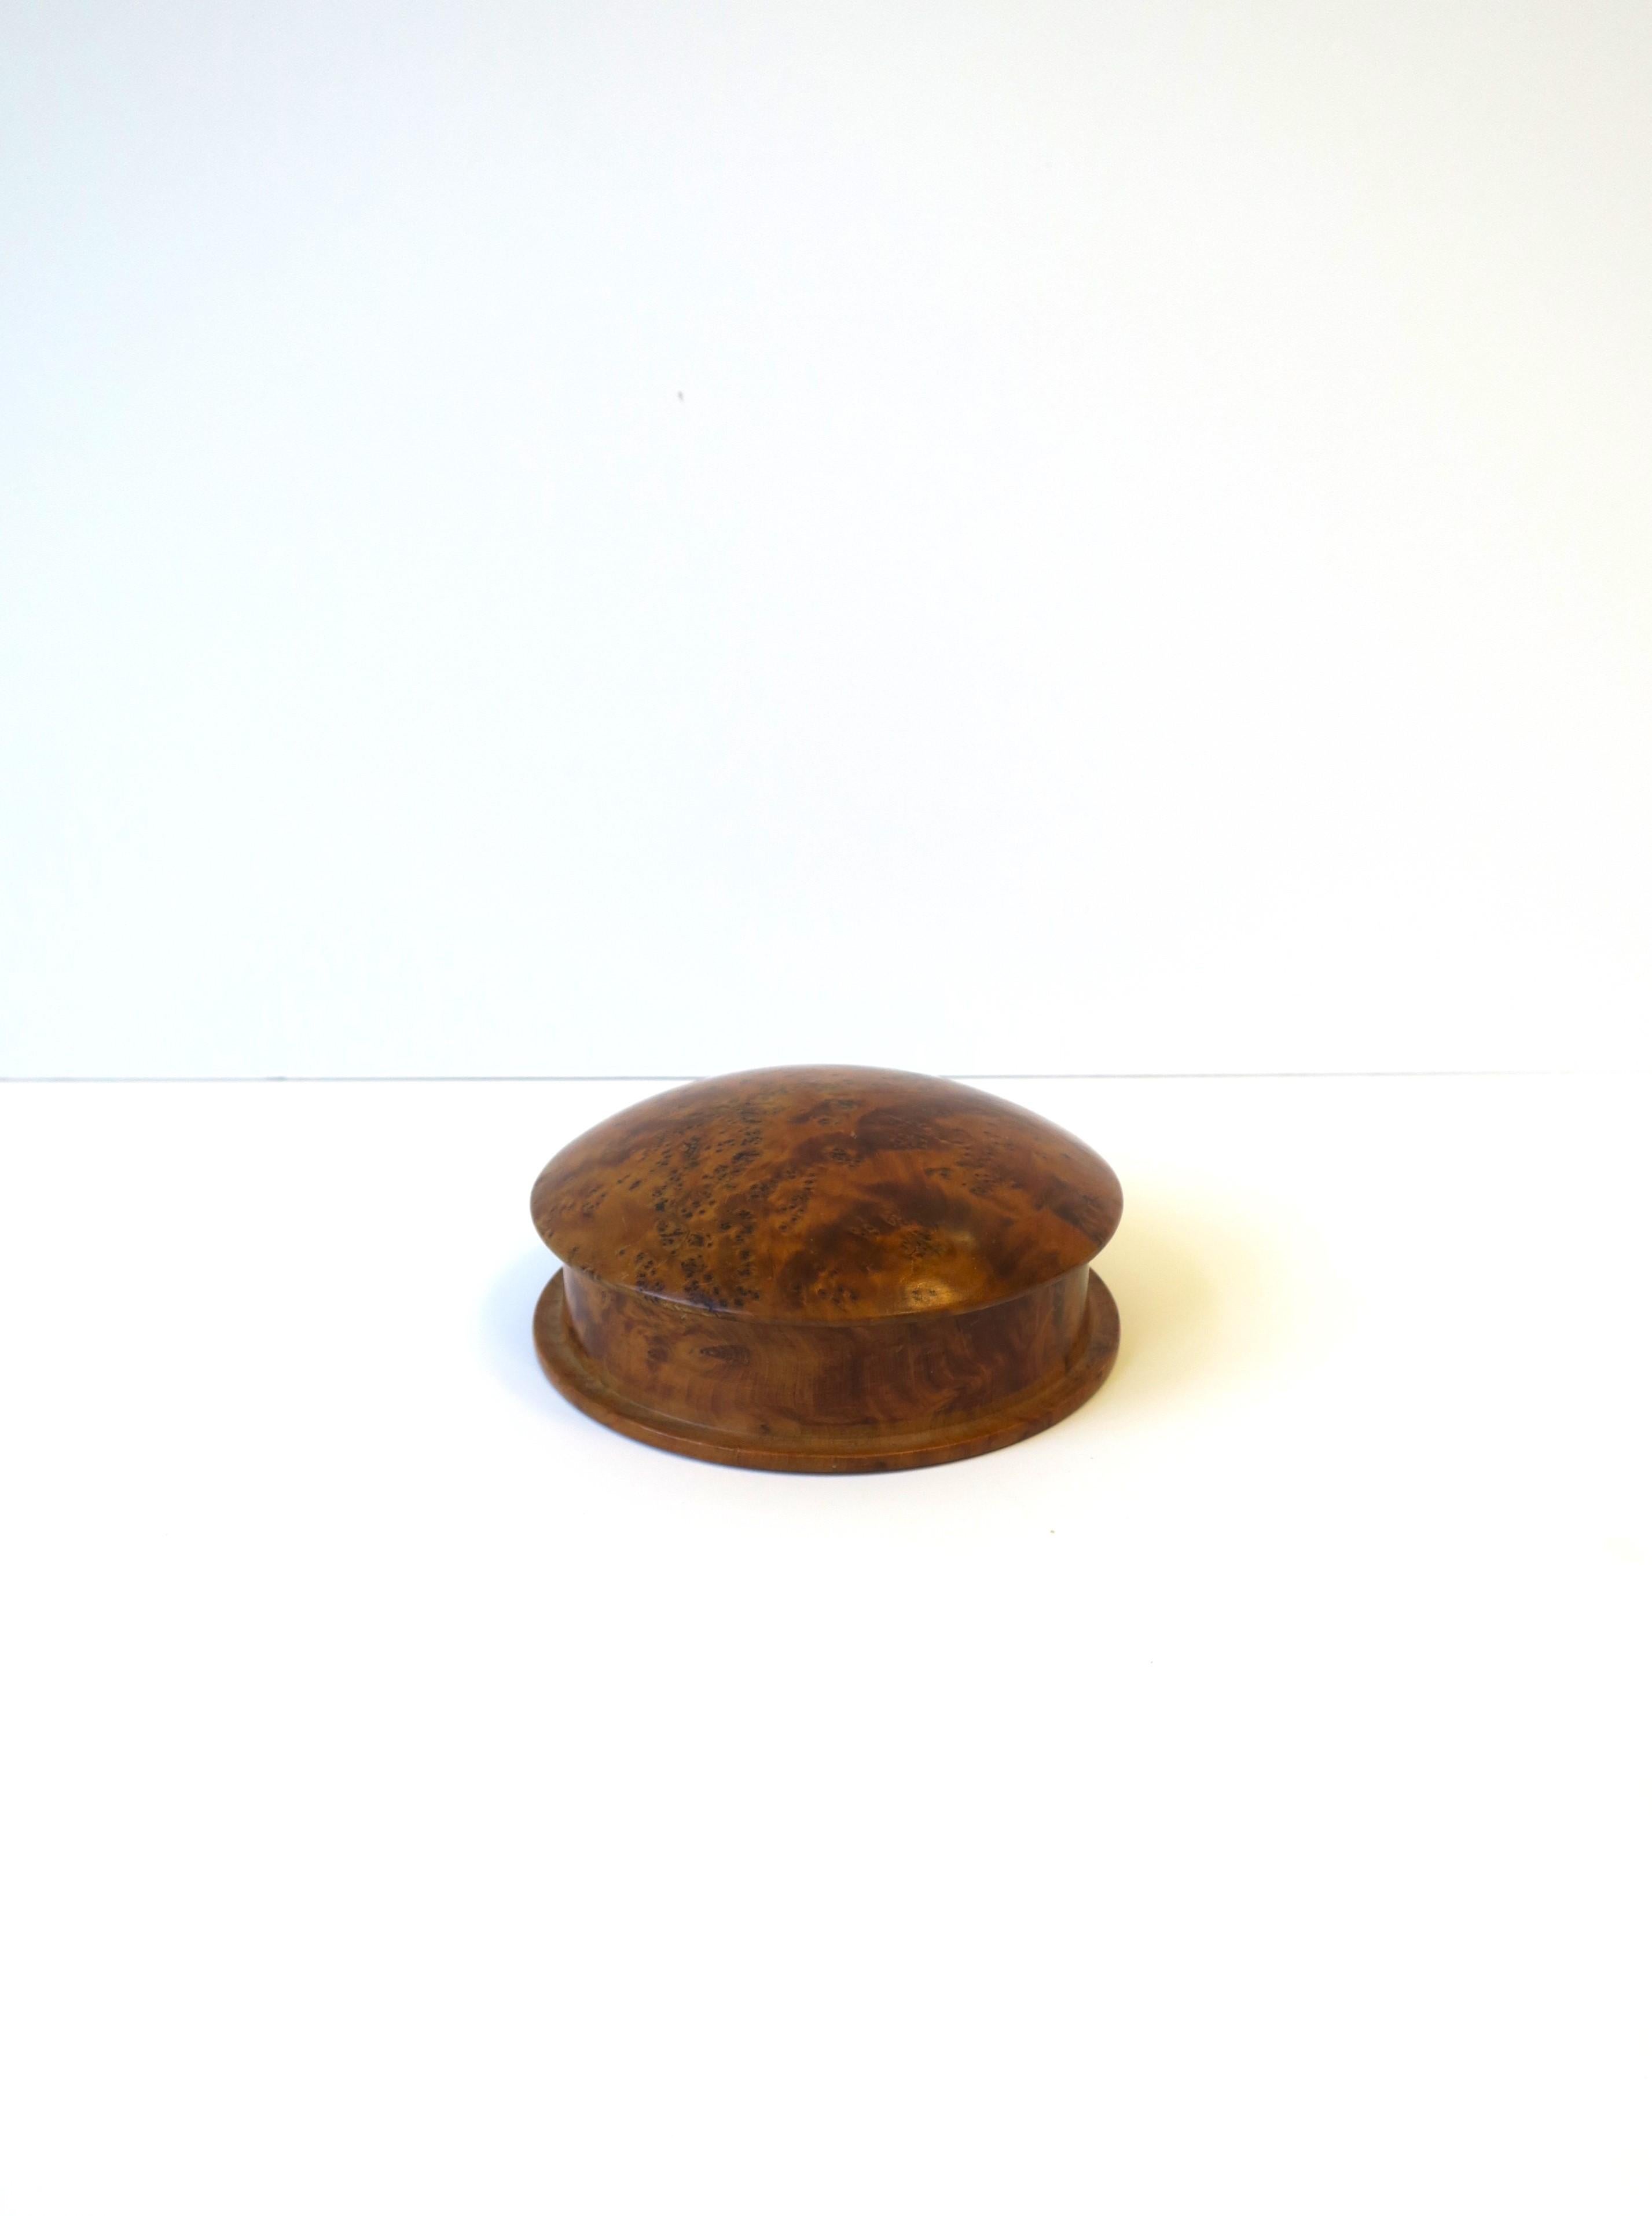 A beautiful round burl wood box. A great piece to hold jewelry or other items. Convenient for a desk, vanity, dresser, walk-in-closet, etc. Excellent condition as shown in images. Dimensions: 5.19